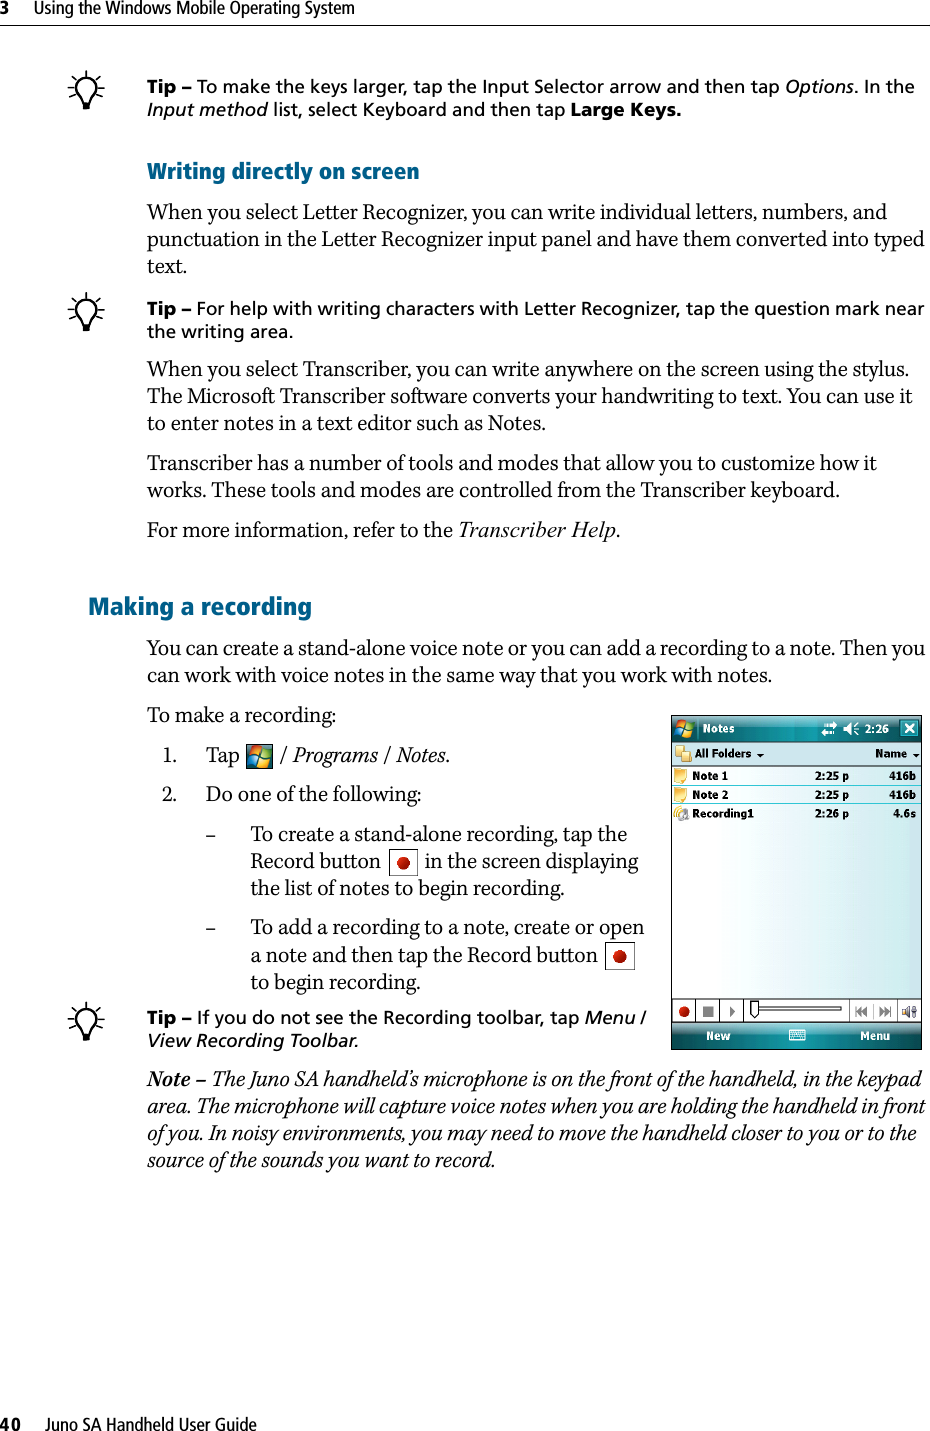 3     Using the Windows Mobile Operating System40     Juno SA Handheld User GuideBTip – To make the keys larger, tap the Input Selector arrow and then tap Options. In the Input method list, select Keyboard and then tap Large Keys.Writing directly on screenWhen you select Letter Recognizer, you can write individual letters, numbers, and punctuation in the Letter Recognizer input panel and have them converted into typed text. BTip – For help with writing characters with Letter Recognizer, tap the question mark near the writing area. When you select Transcriber, you can write anywhere on the screen using the stylus. The Microsoft Transcriber software converts your handwriting to text. You can use it to enter notes in a text editor such as Notes.Transcriber has a number of tools and modes that allow you to customize how it works. These tools and modes are controlled from the Transcriber keyboard.For more information, refer to the Transcriber Help.Making a recordingYou can create a stand-alone voice note or you can add a recording to a note. Then you can work with voice notes in the same way that you work with notes.To make a recording:   1. Tap / Programs / Notes.     2. Do one of the following:–To create a stand-alone recording, tap the Record button   in the screen displaying the list of notes to begin recording.–To add a recording to a note, create or open a note and then tap the Record button   to begin recording.BTip – If you do not see the Recording toolbar, tap Menu / View Recording Toolbar.Note – The Juno SA handheld’s microphone is on the front of the handheld, in the keypad area. The microphone will capture voice notes when you are holding the handheld in front of you. In noisy environments, you may need to move the handheld closer to you or to the source of the sounds you want to record.